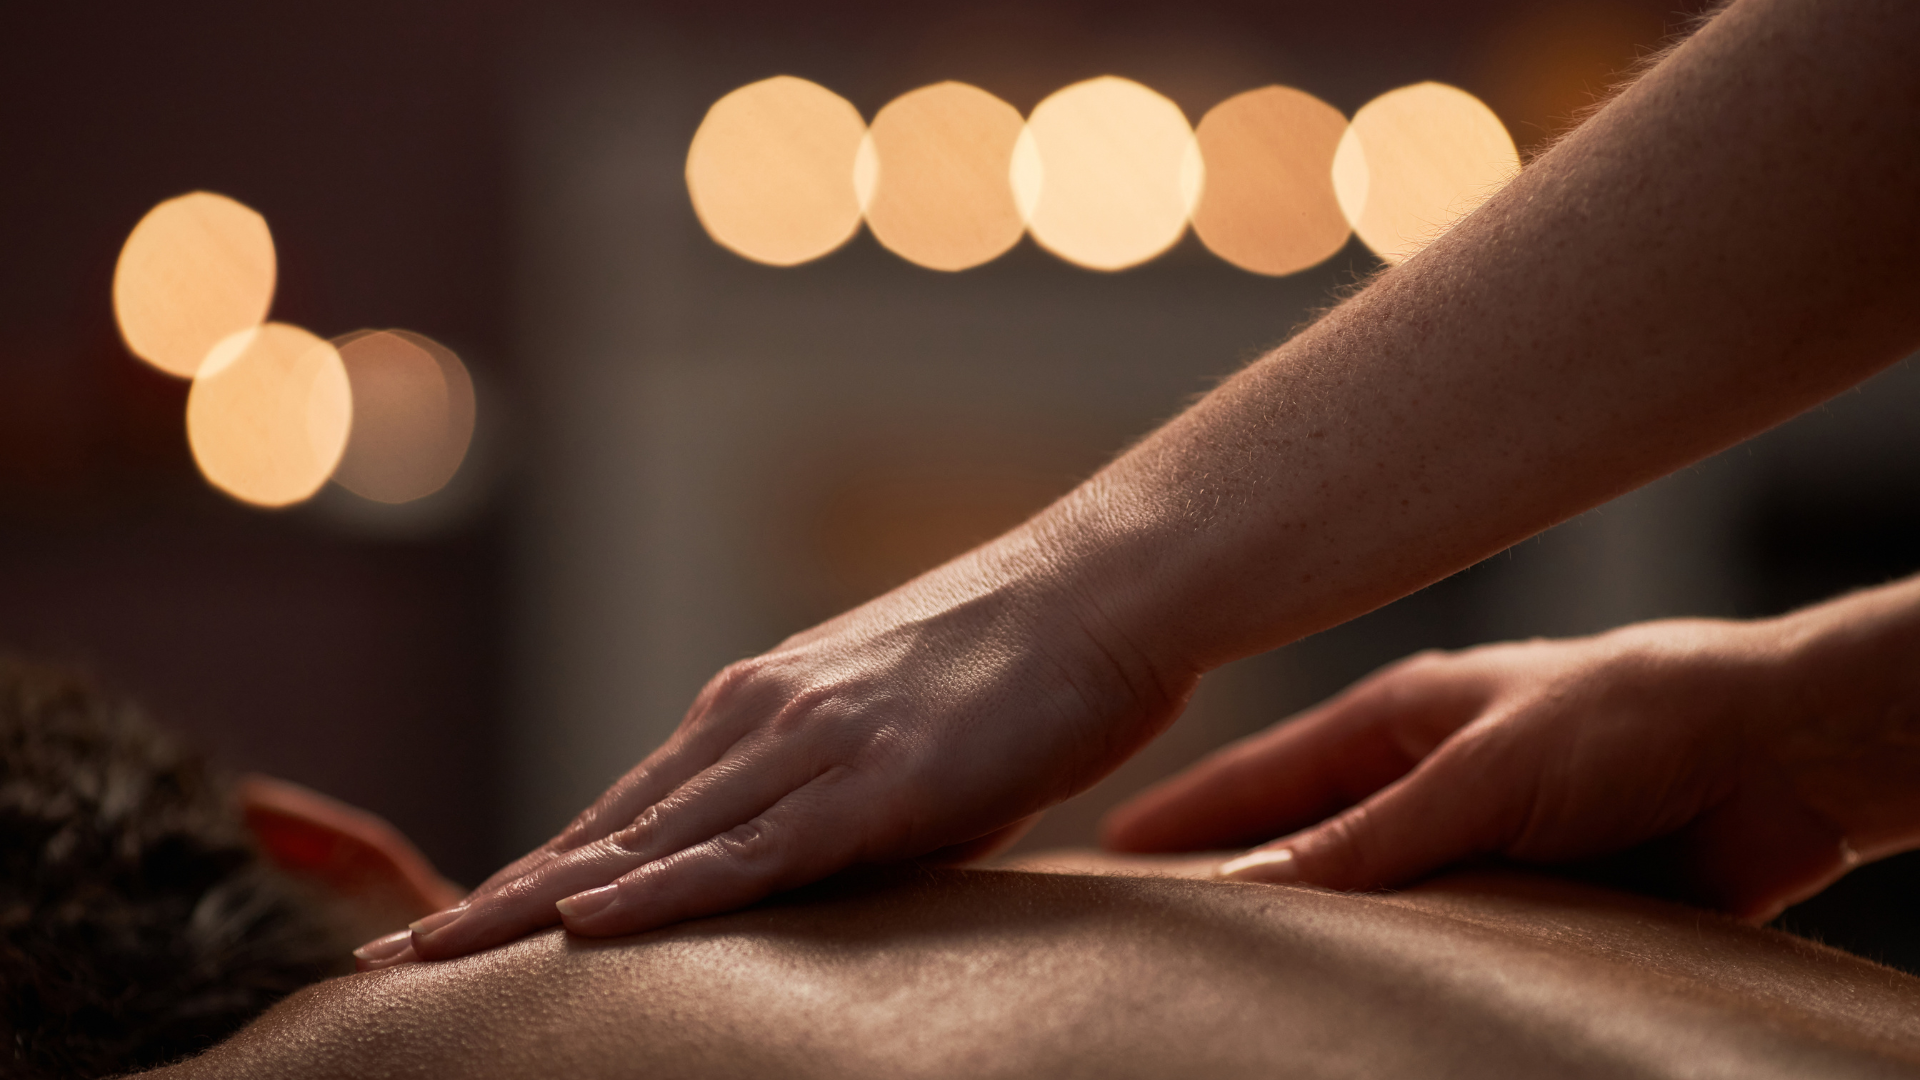 myofascial release therapy is like unlocking your body’s ultimate chill mode